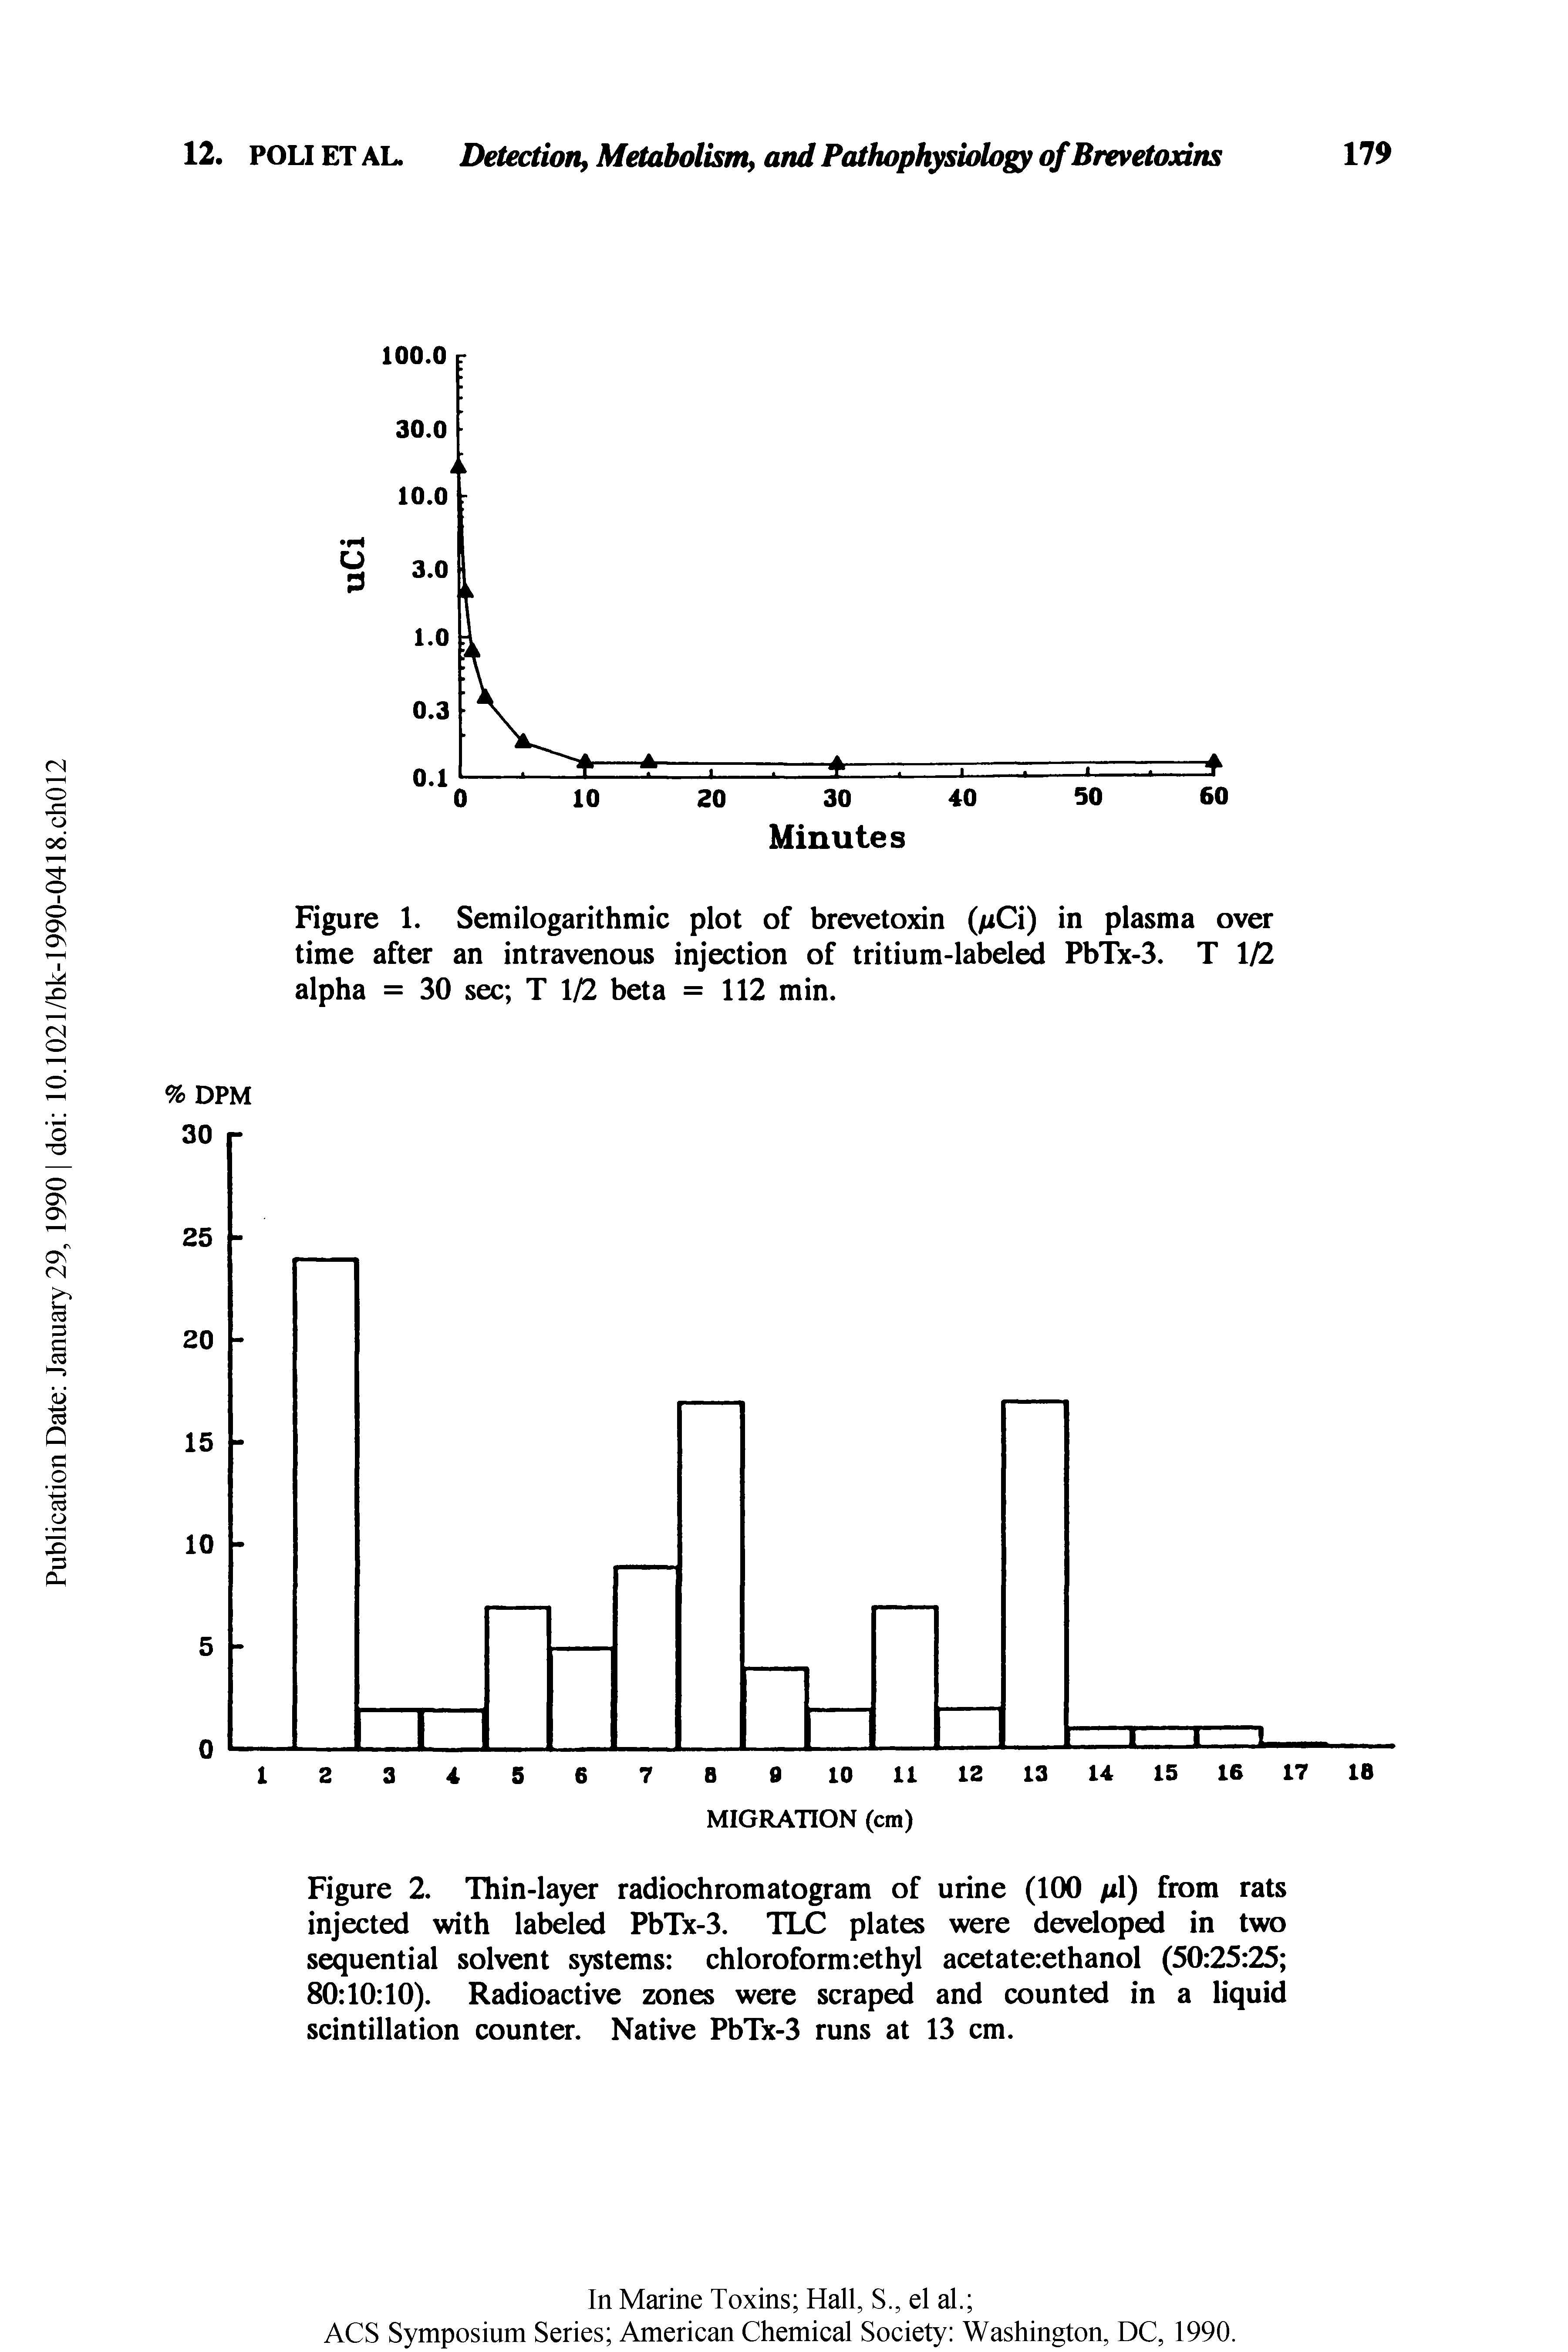 Figure 2. Thin-layer radiochromatogram of urine (100 il) from rats injected with labeled PbTx-3. TLC plates were developed in two sequential solvent systems chloroform ethyl acetate ethanol (50 25 25 80 10 10). Radioactive zones were scraped and counted in a liquid scintillation counter. Native PbTx-3 runs at 13 cm.